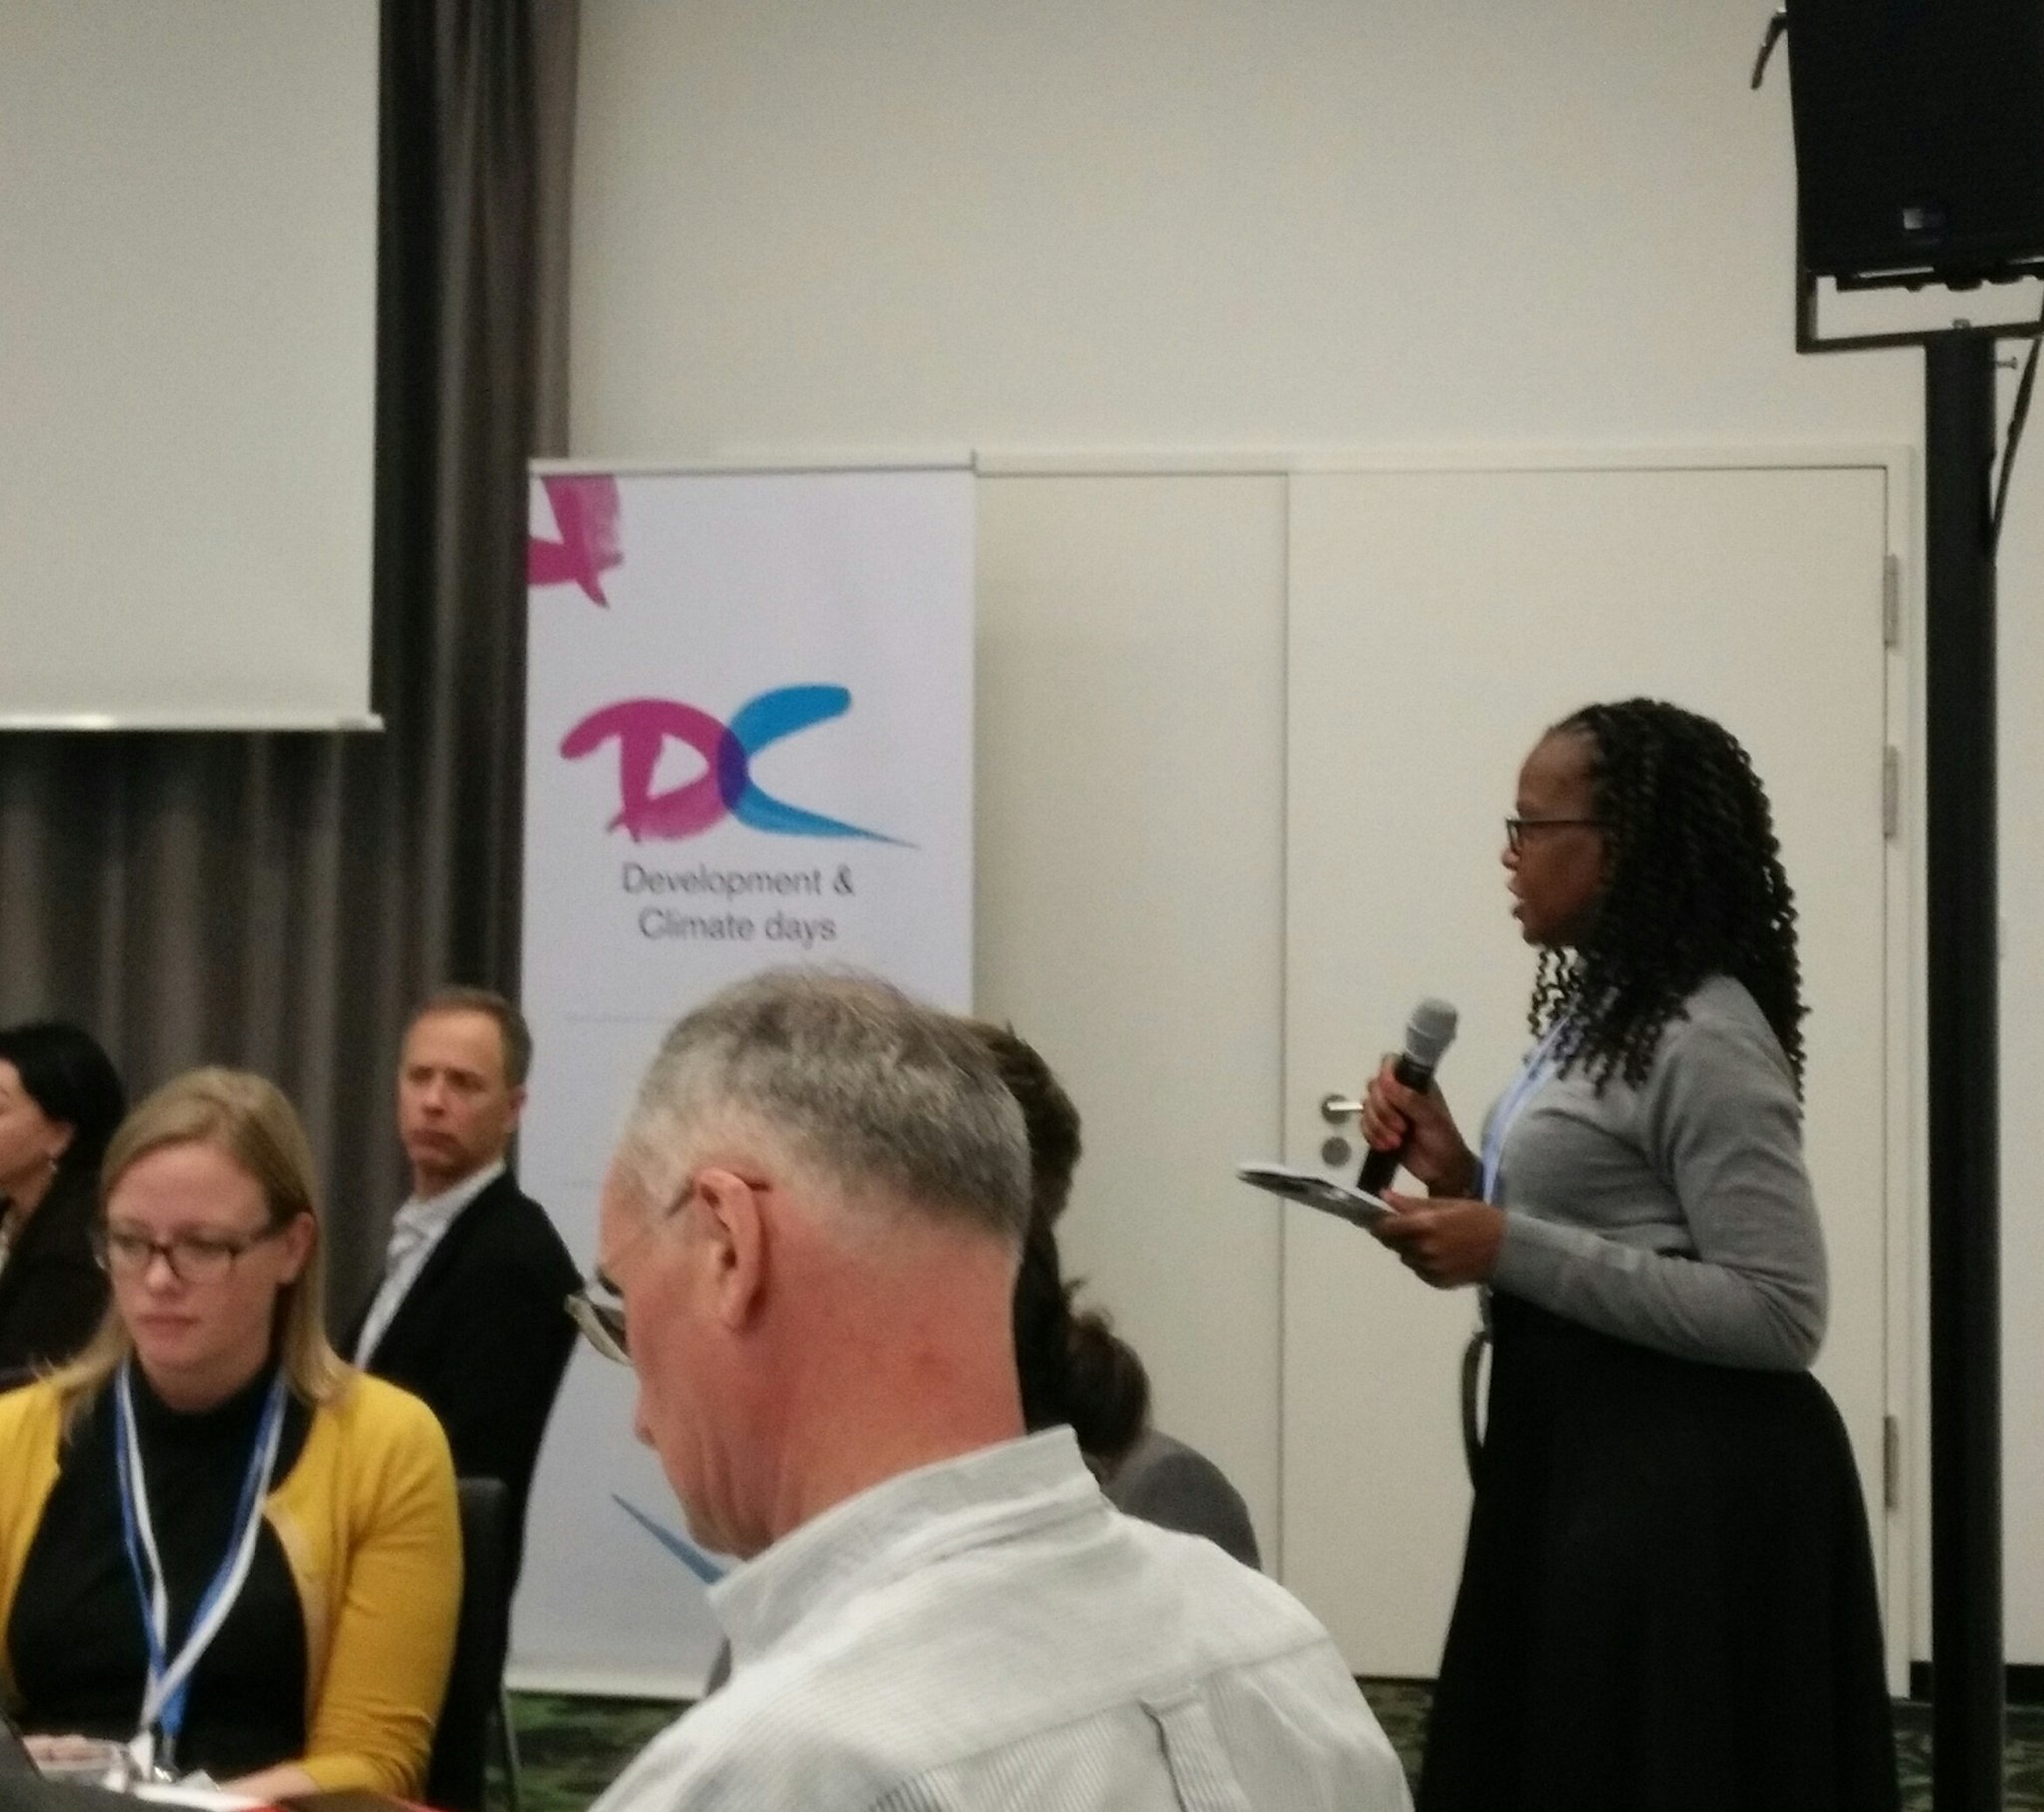 #DCdays17 business and resilience session highlights that  climate change is leading to displacement of raw materials in the supply chain #COP23 https://t.co/khSOURZ5AA